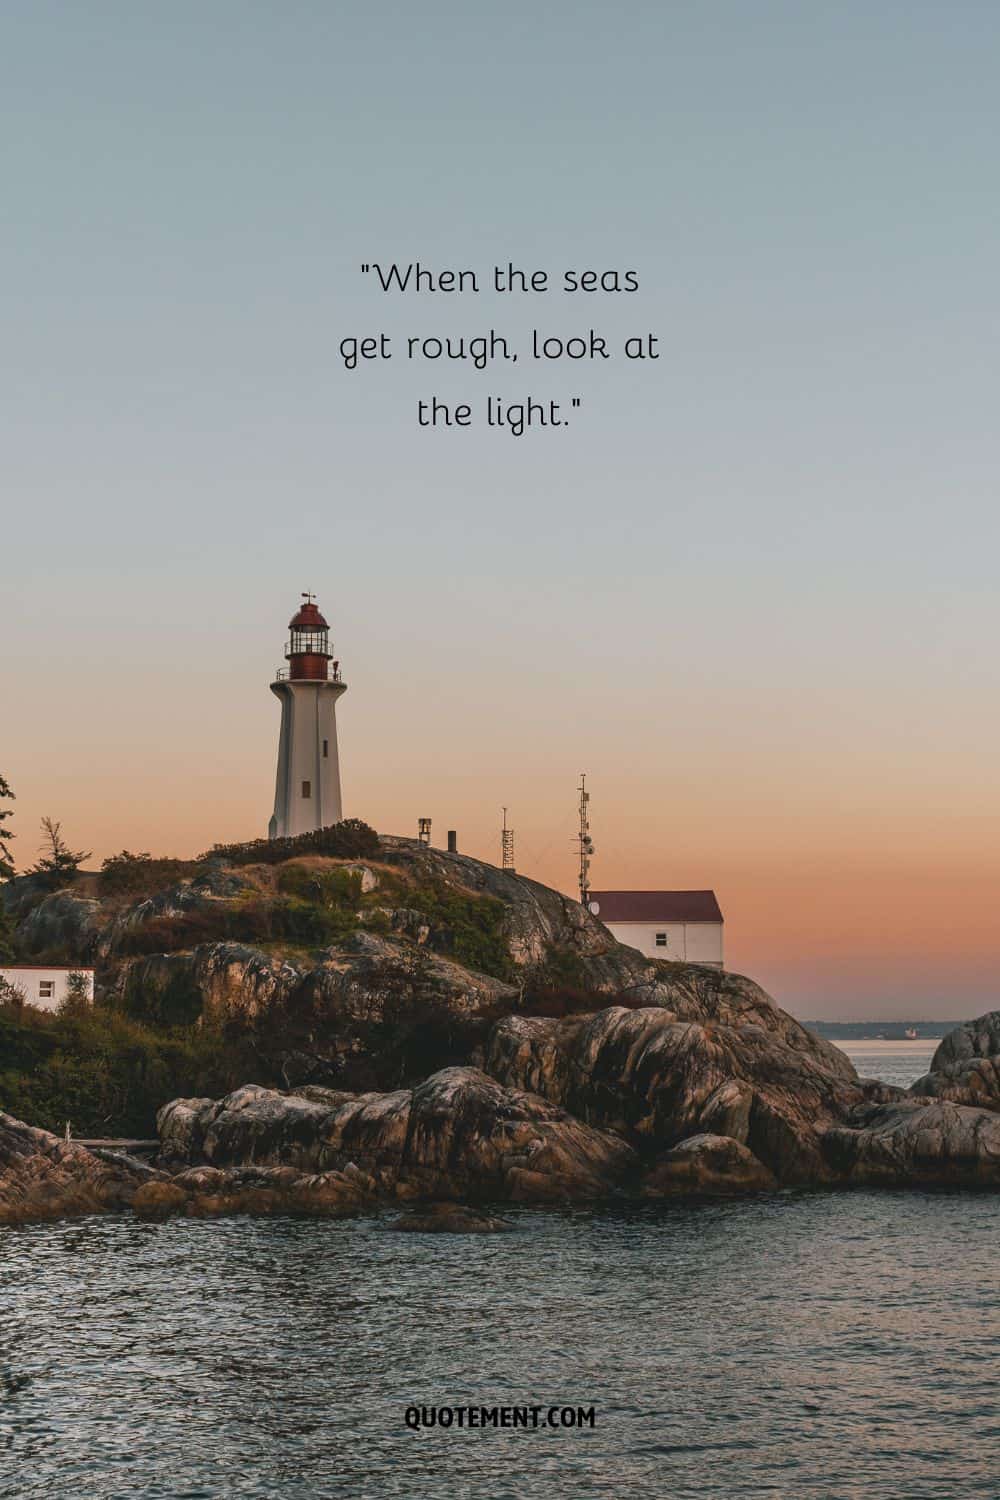 Inspiring and metaphorical quote and a lighthouse in the sunset